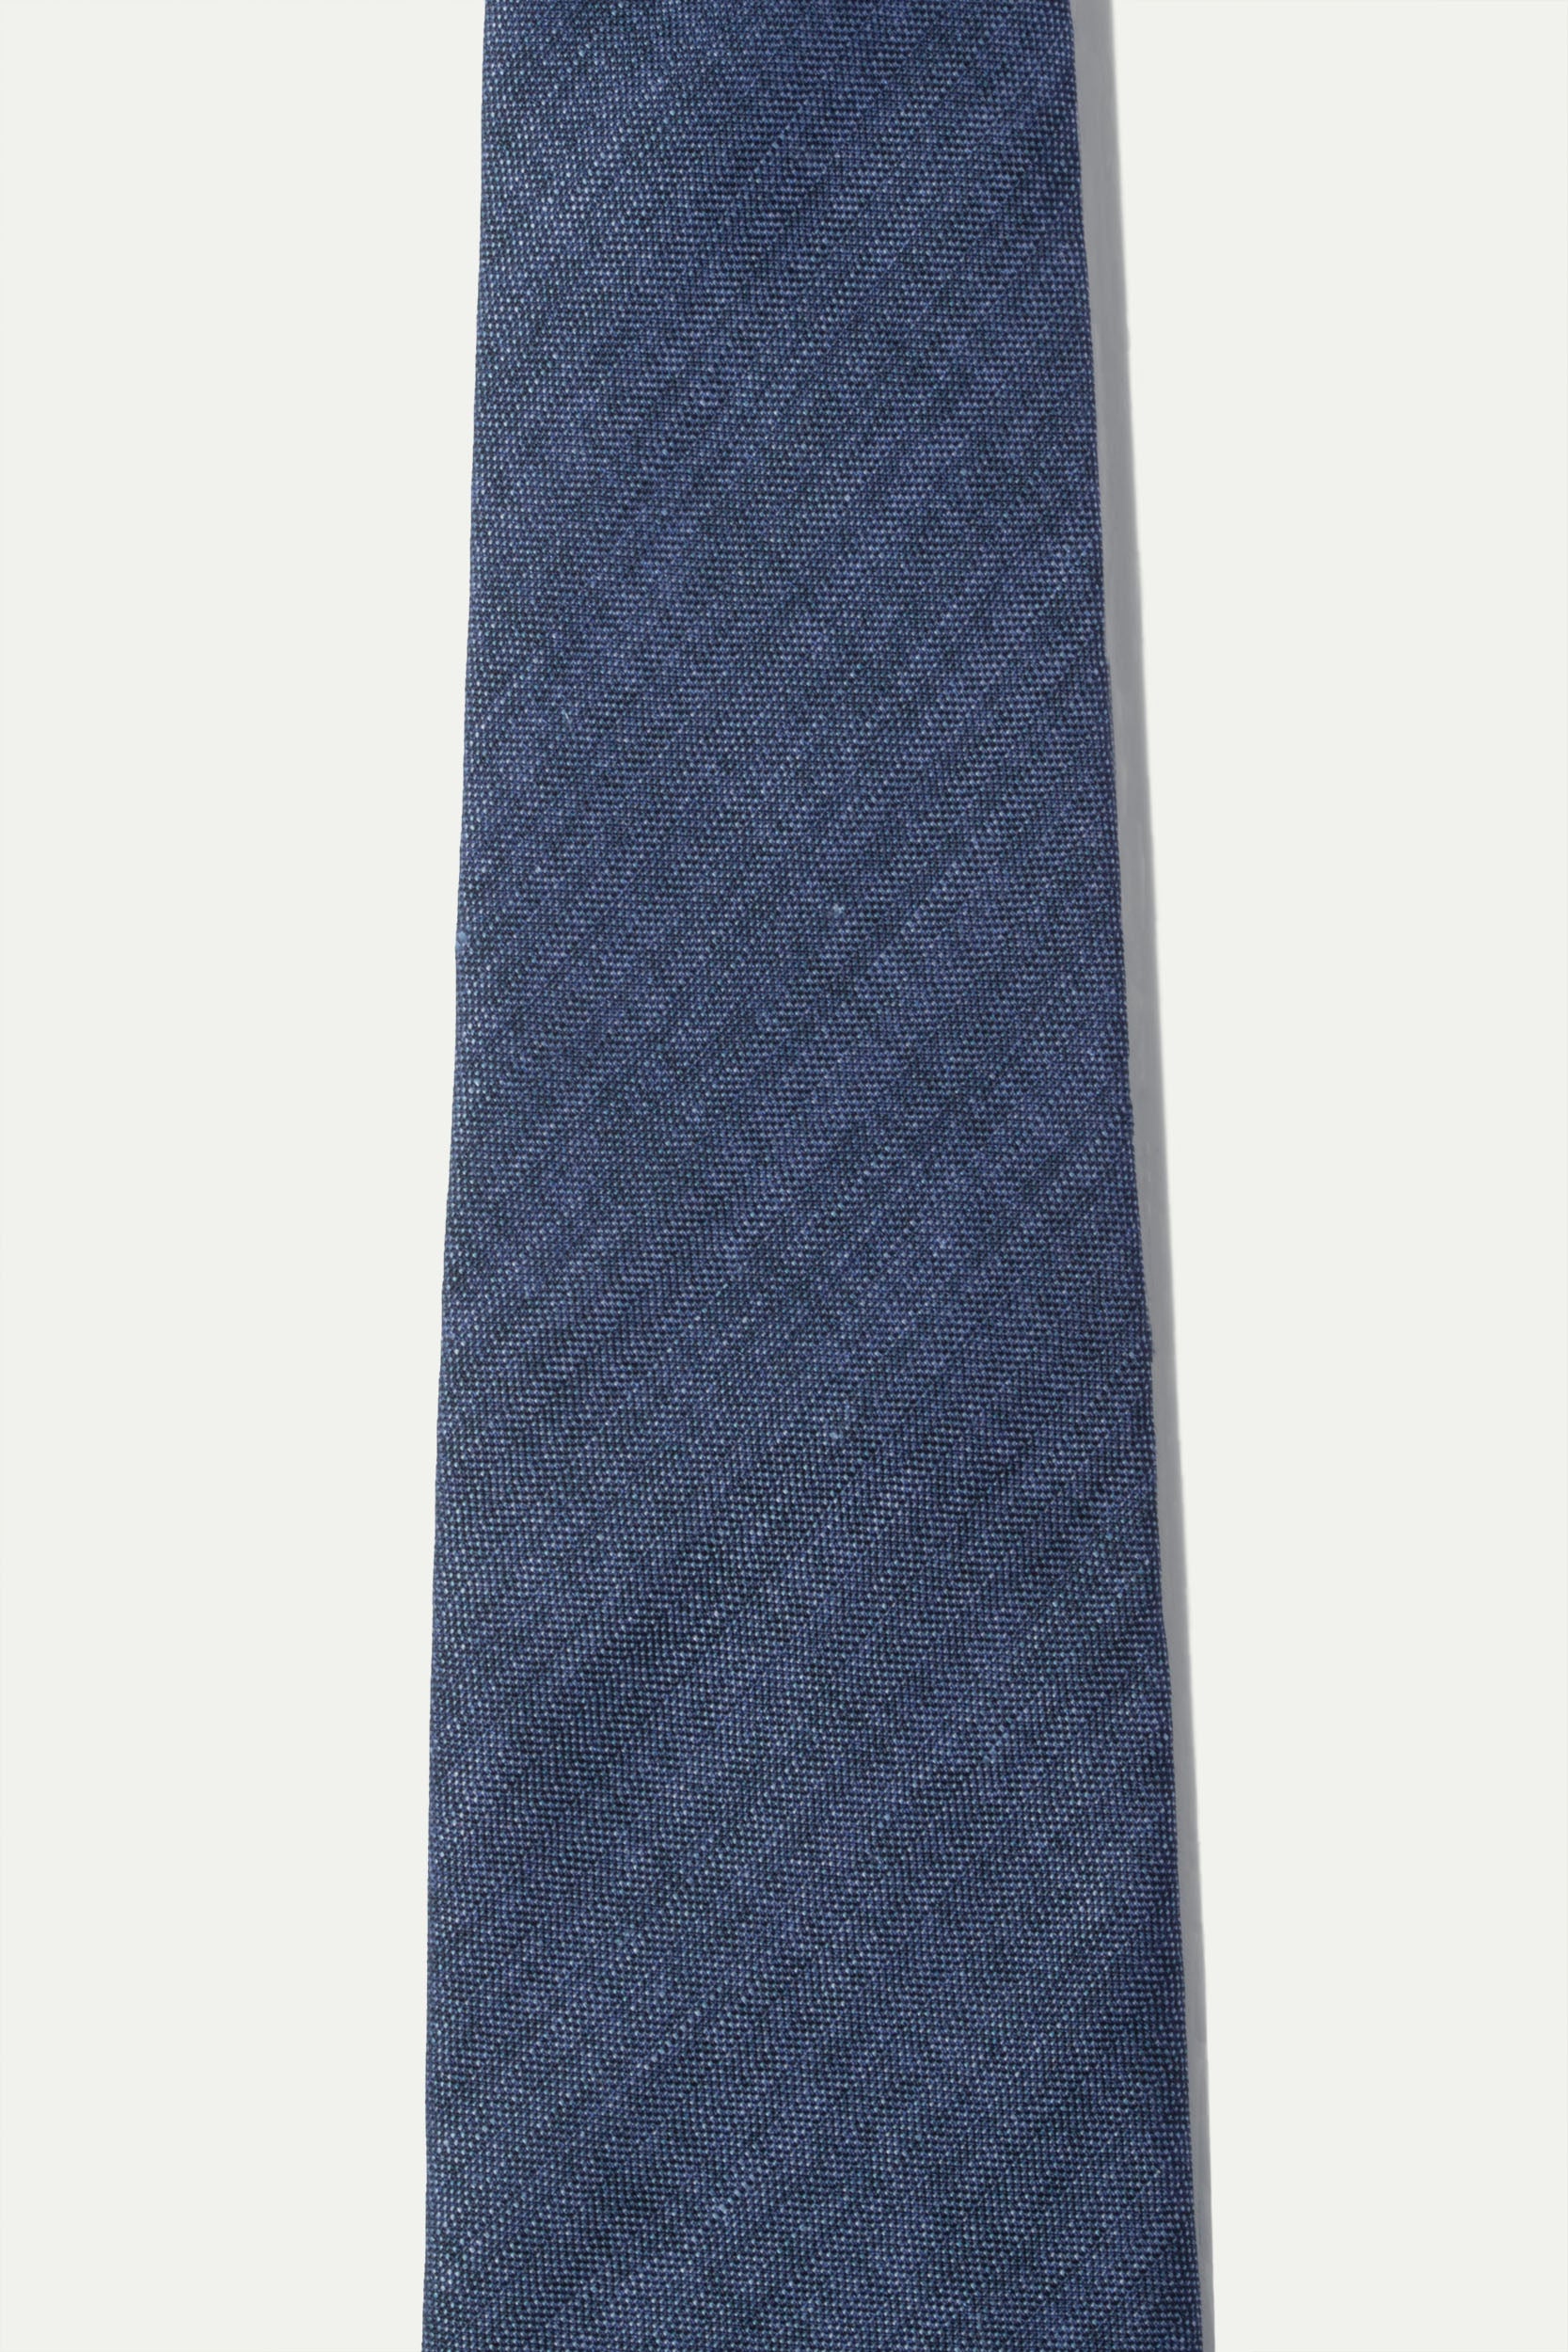 Blue printed silk tie - Made In Italy